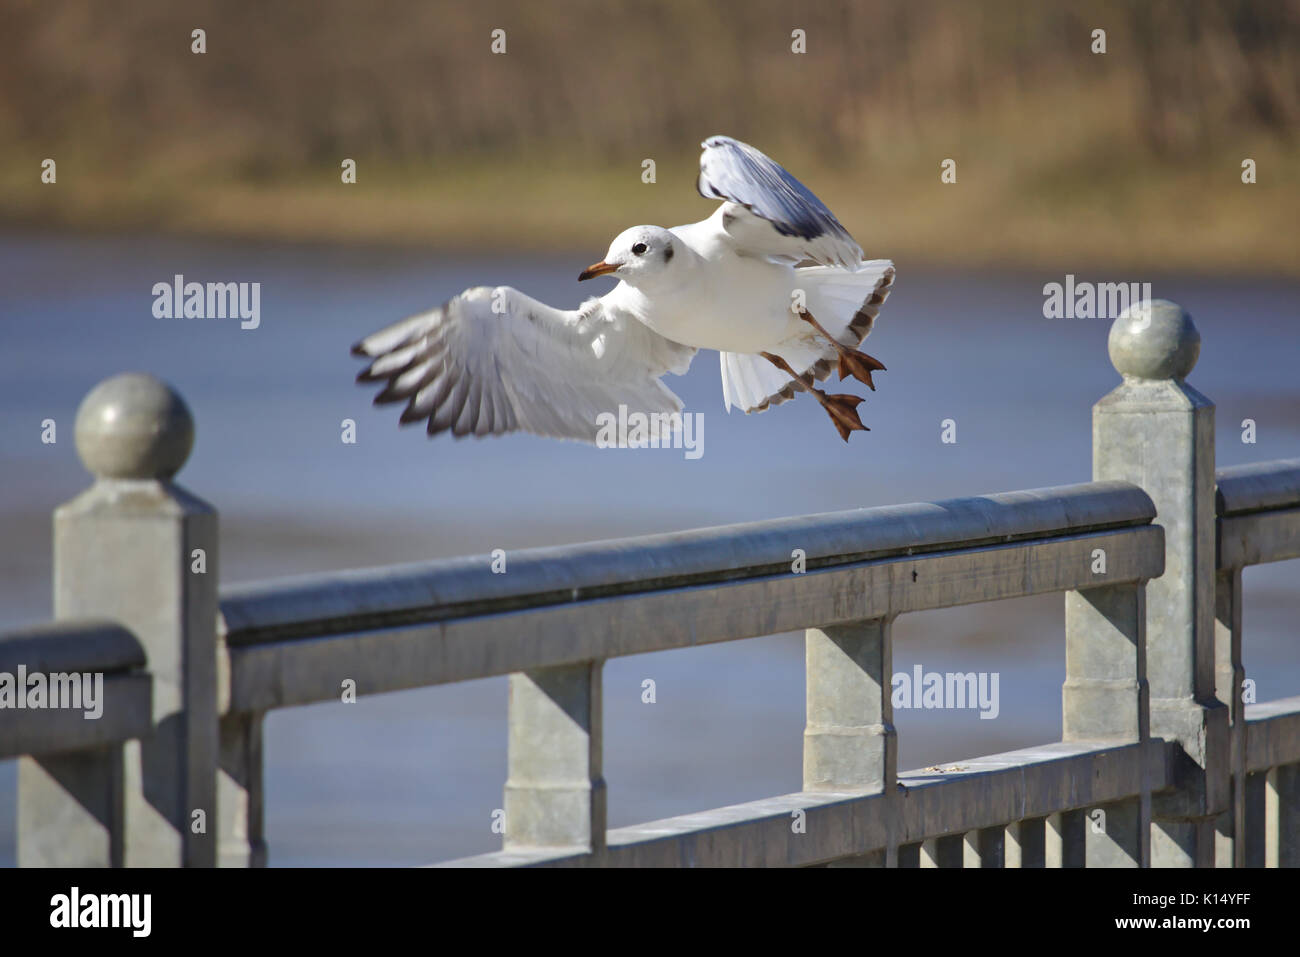 Black-headed gull taking off from a rail Stock Photo